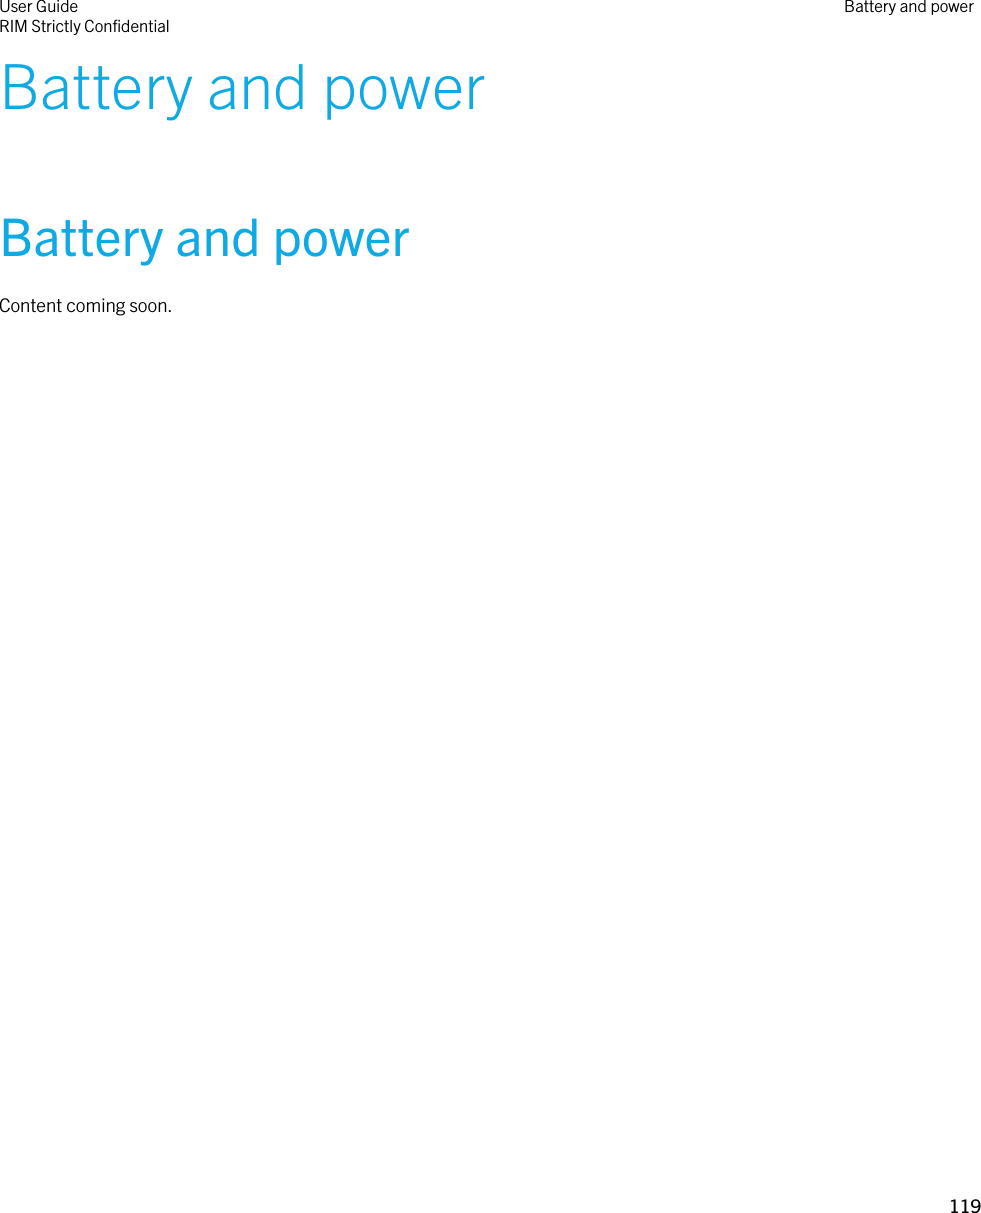 Battery and powerBattery and powerContent coming soon.User GuideRIM Strictly ConfidentialBattery and power119 